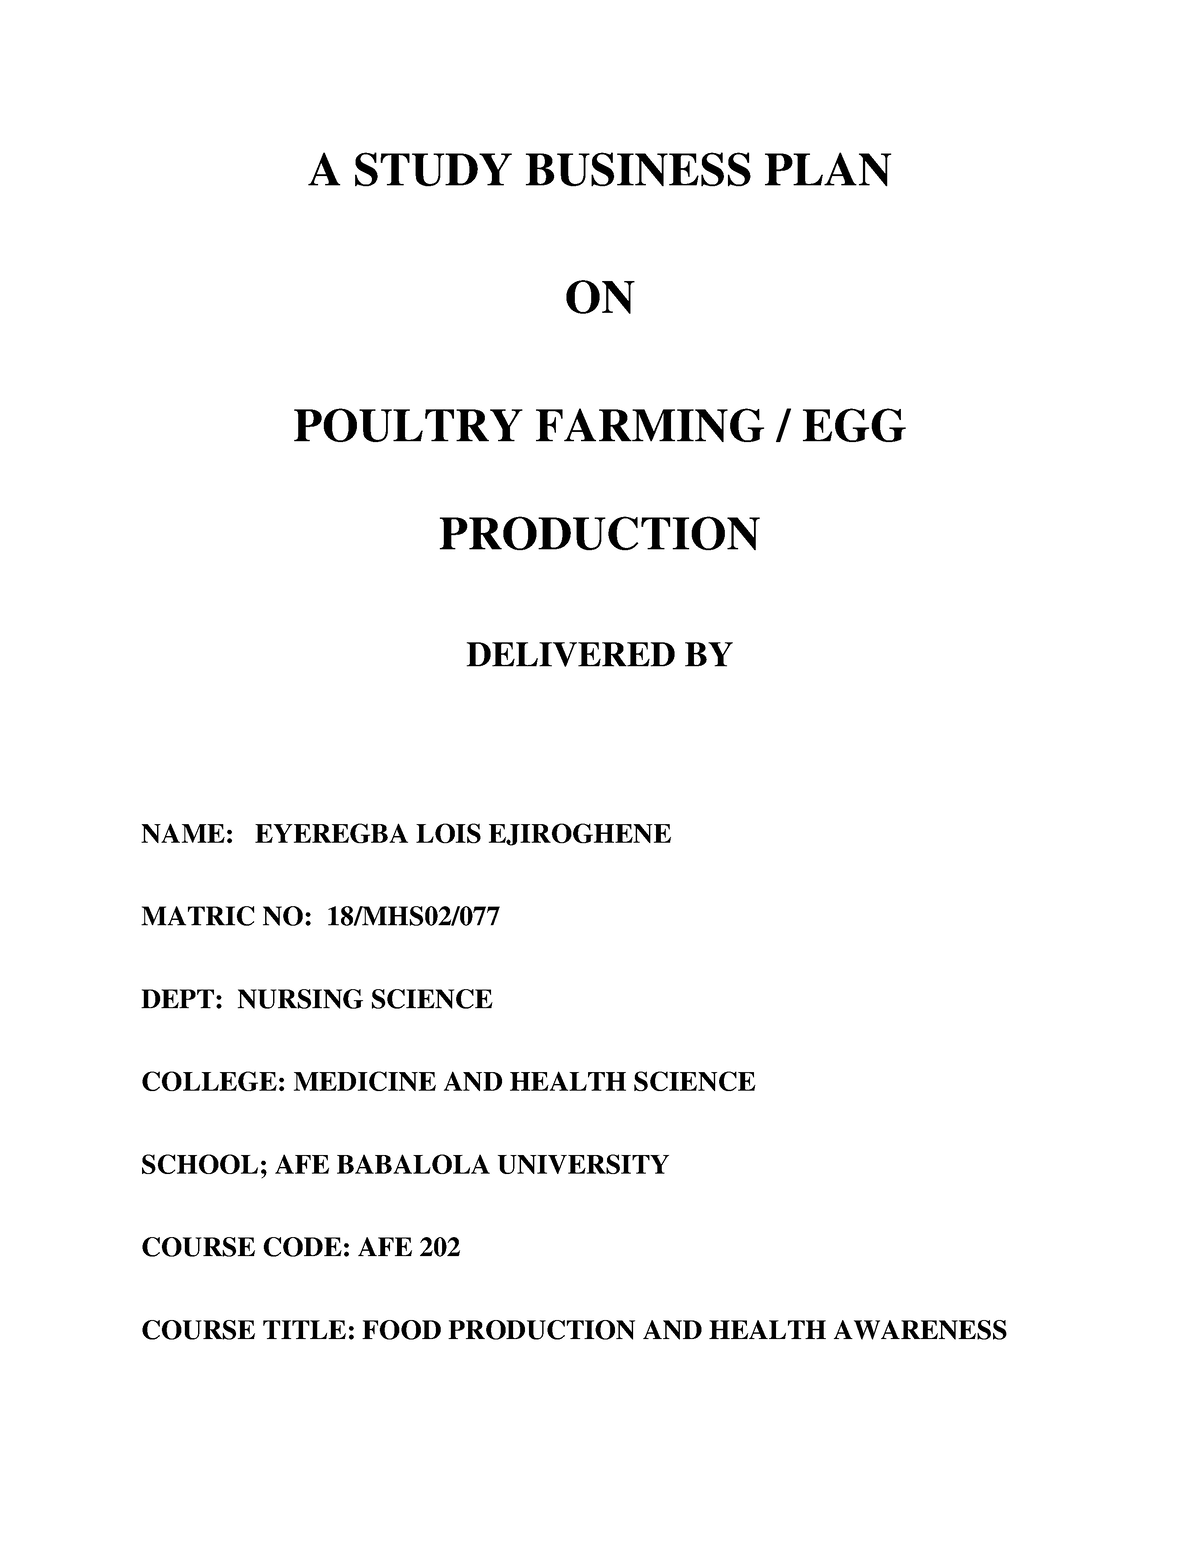 sample business plan on poultry farming